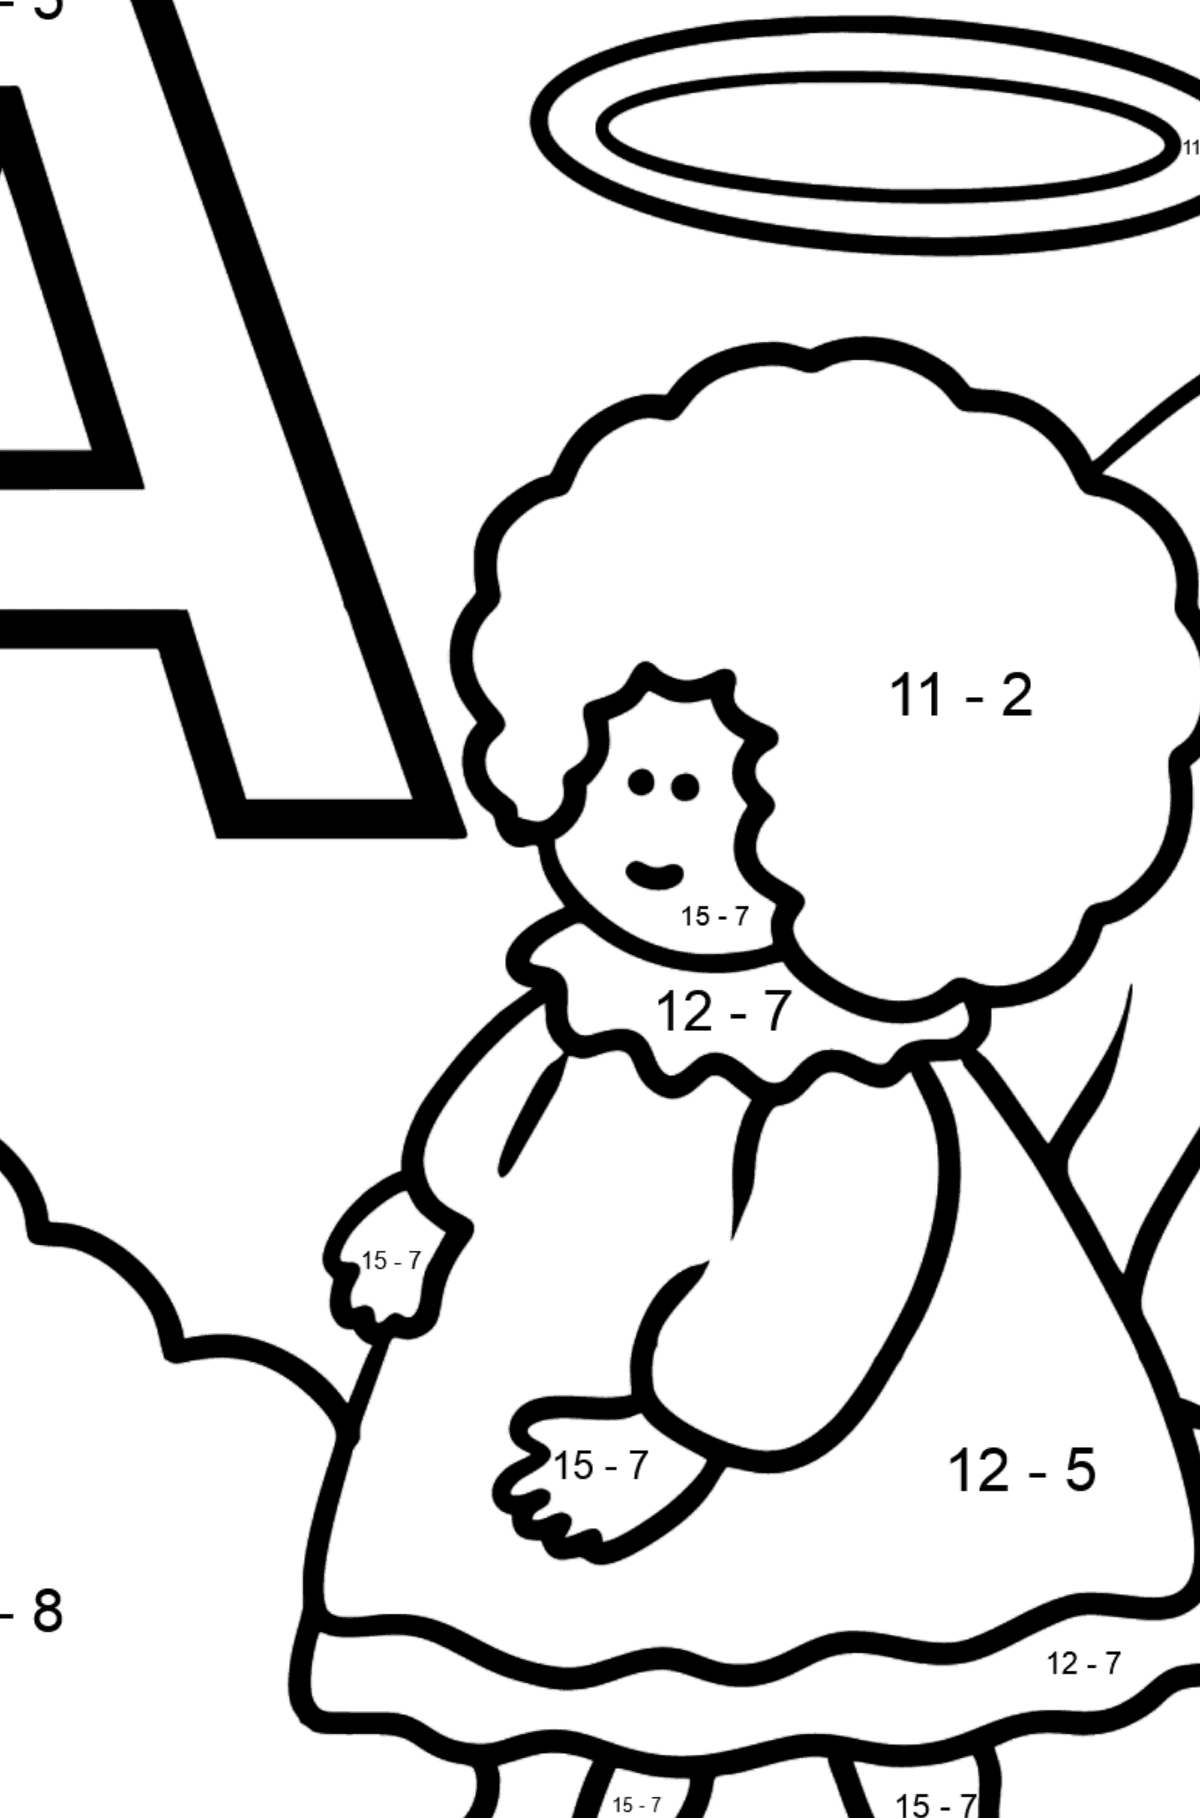 Portuguese Letter A coloring pages - ANJO - Math Coloring - Subtraction for Kids